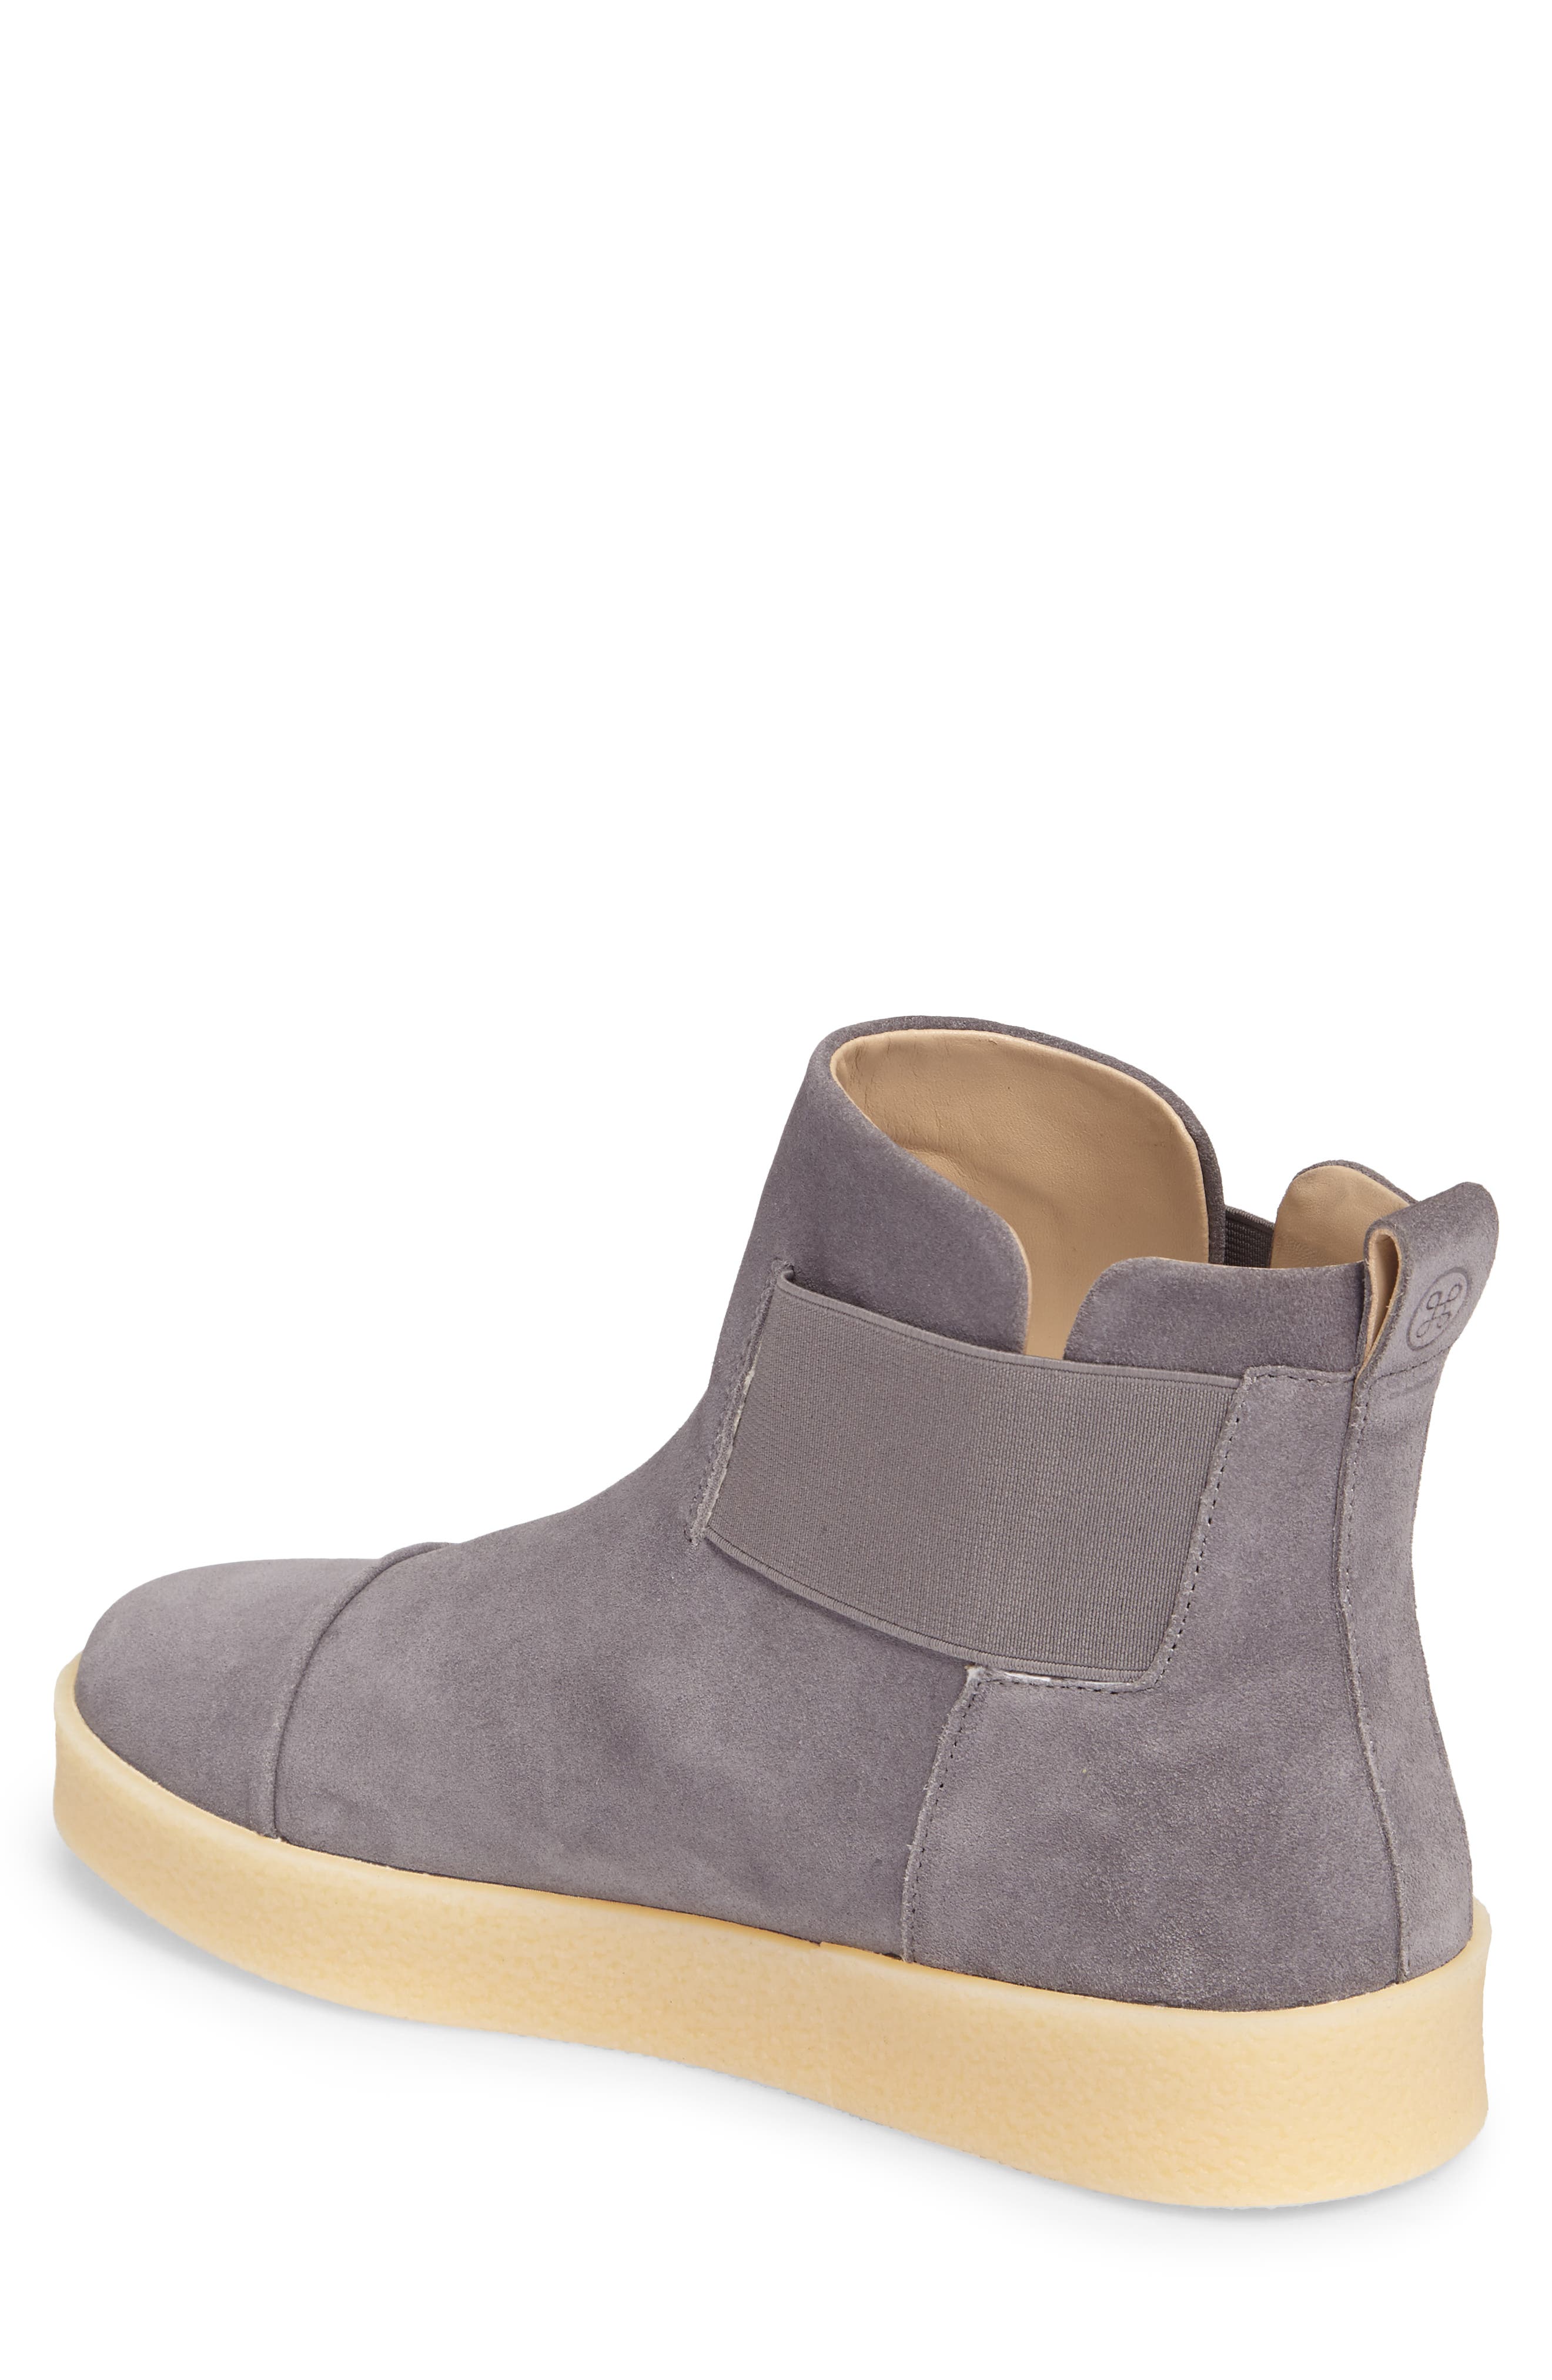 hip and bone chelsea boot